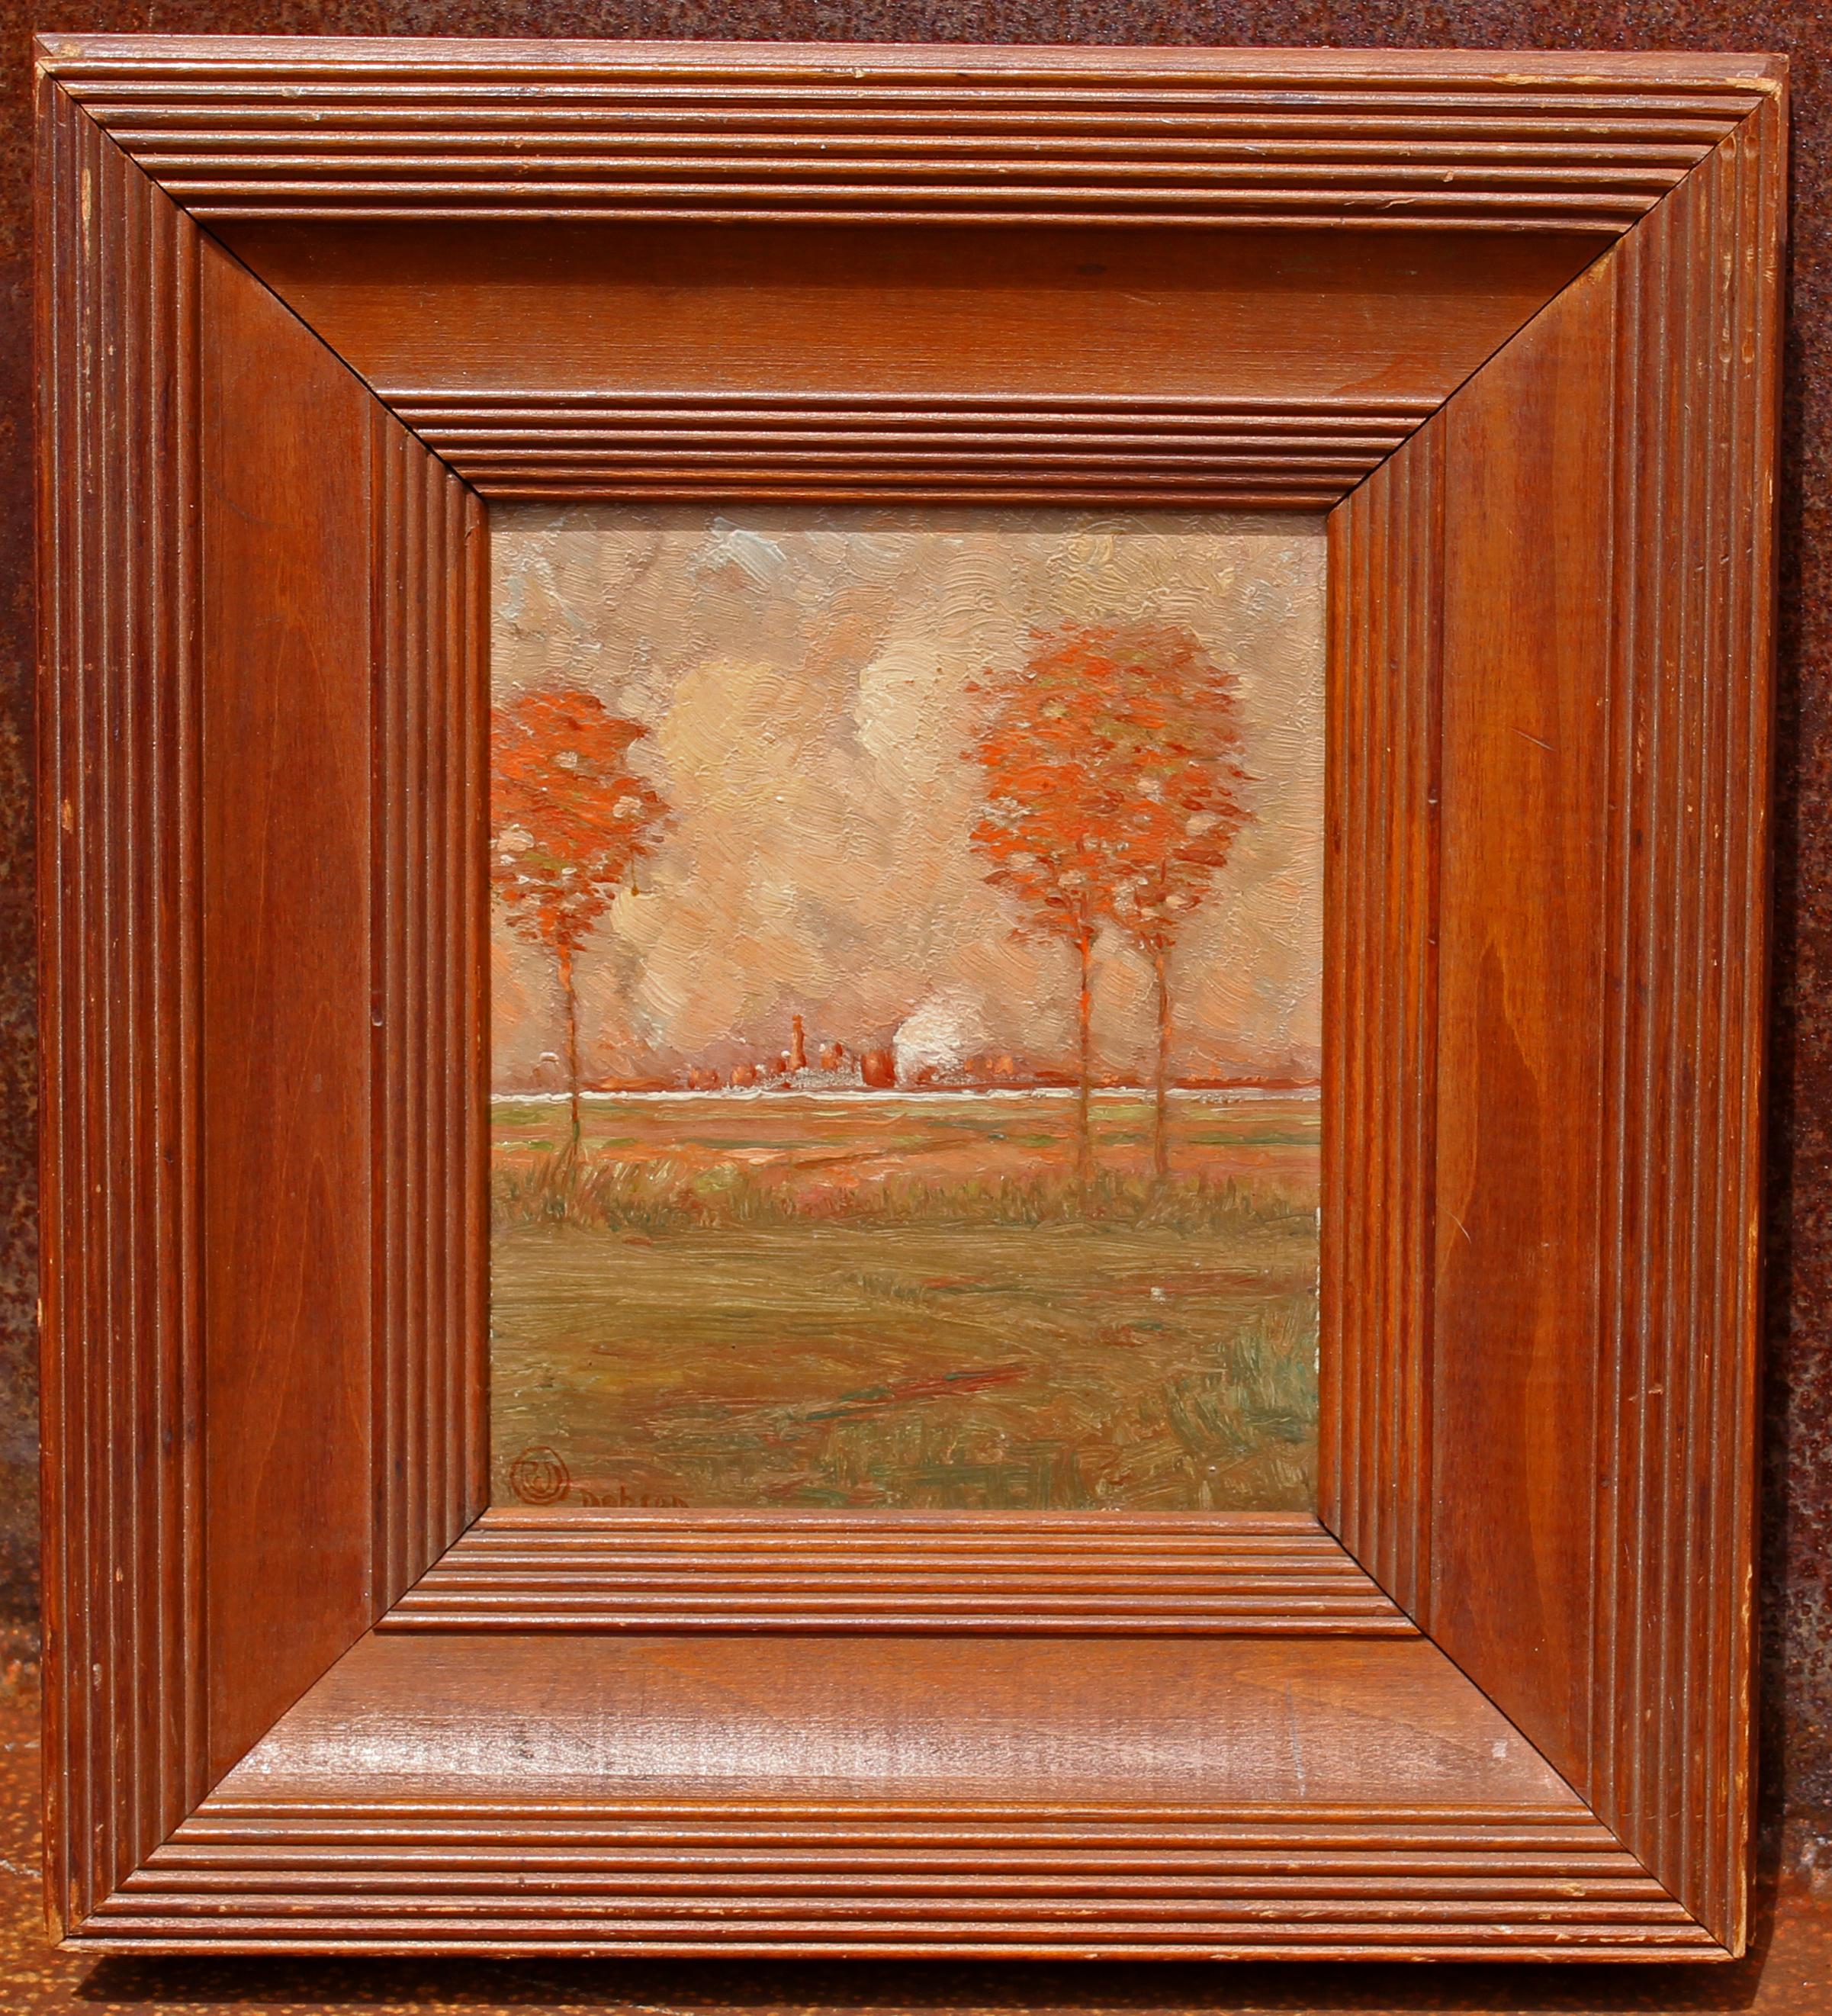 Tonalist landscape oil painting by Robert Cairns Dobson, American oil painting on academy board. In a well matched original frame. Signed and monogrammed lower left, early 20th century. Inscribed on reverse and dated 1909. Dobson (1881-1916) was